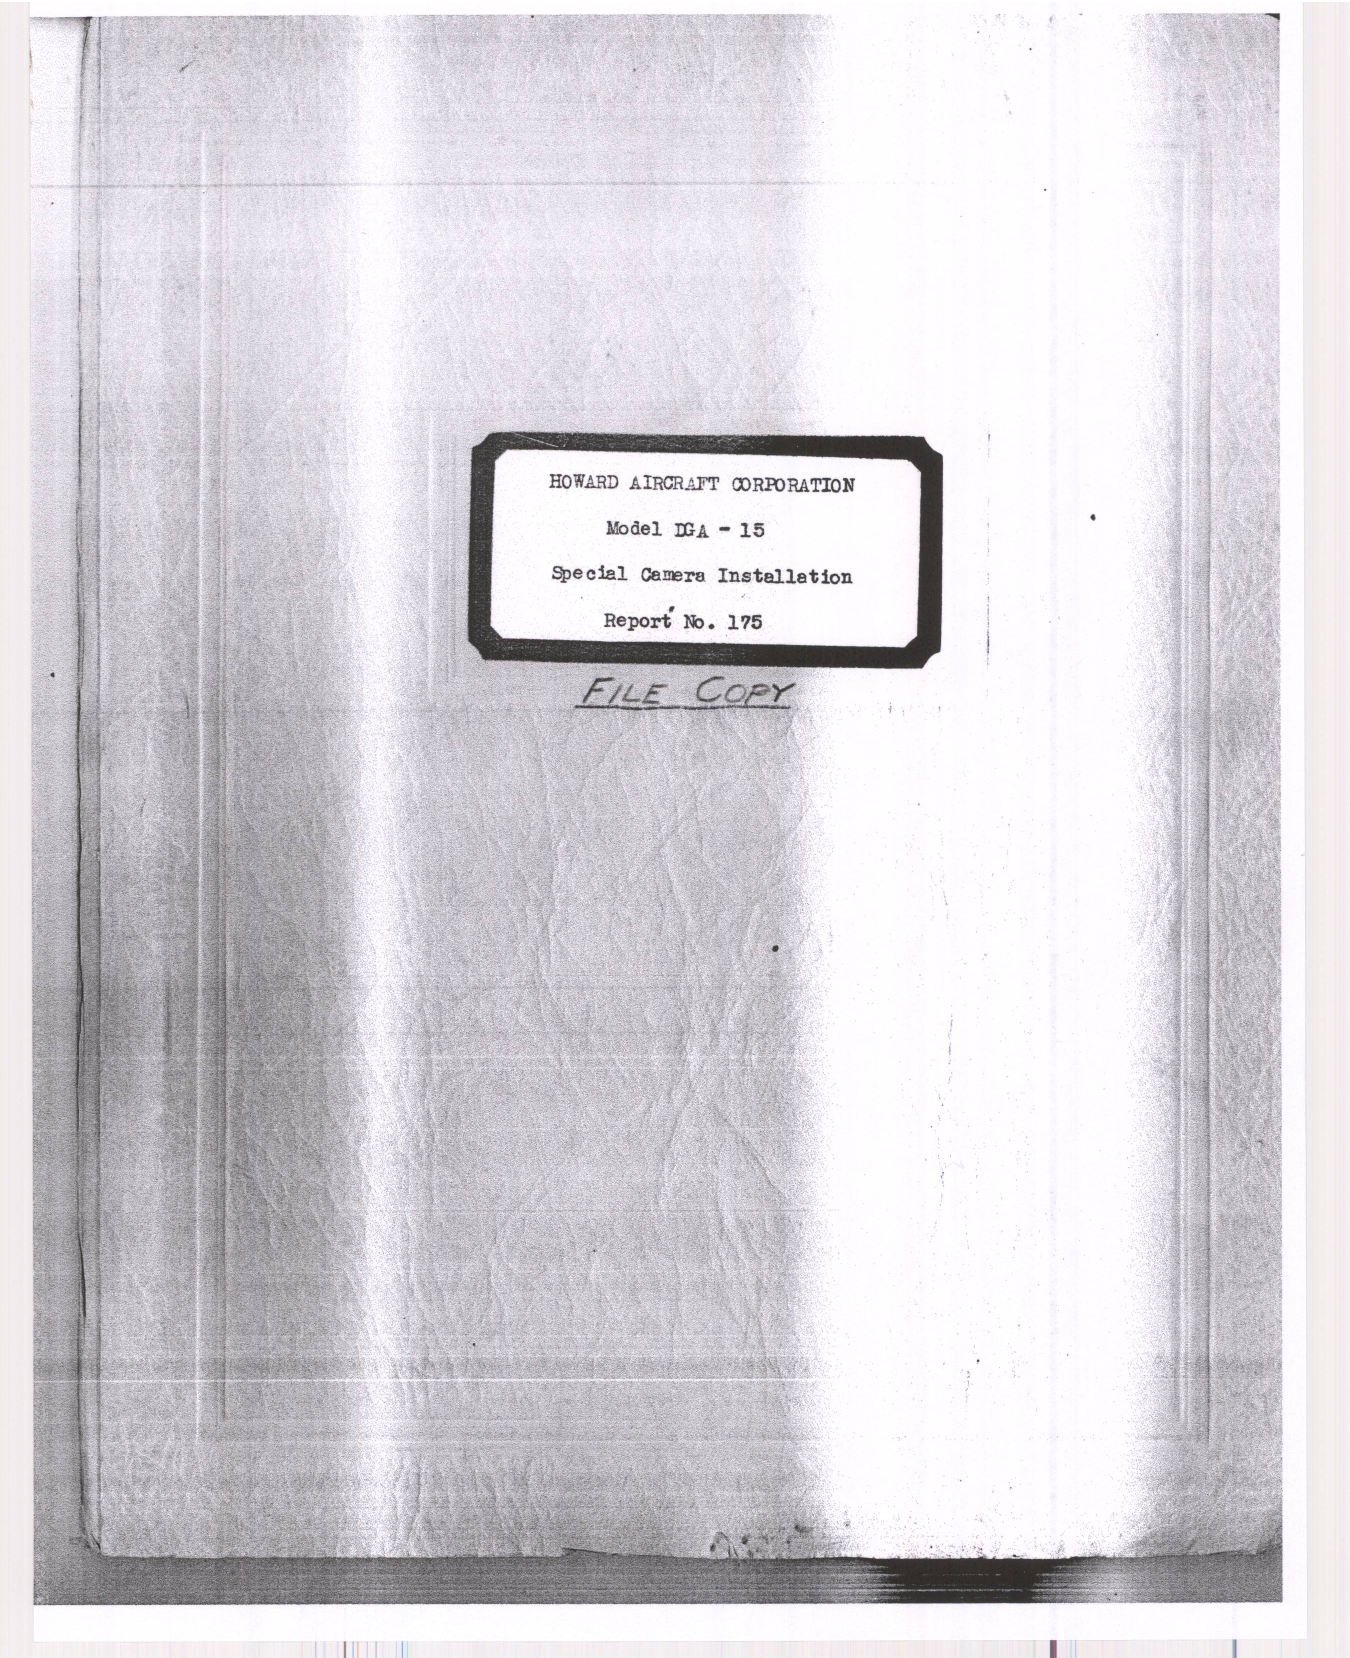 Sample page 1 from AirCorps Library document: Report 175, Special Camera Installation, DGA-15